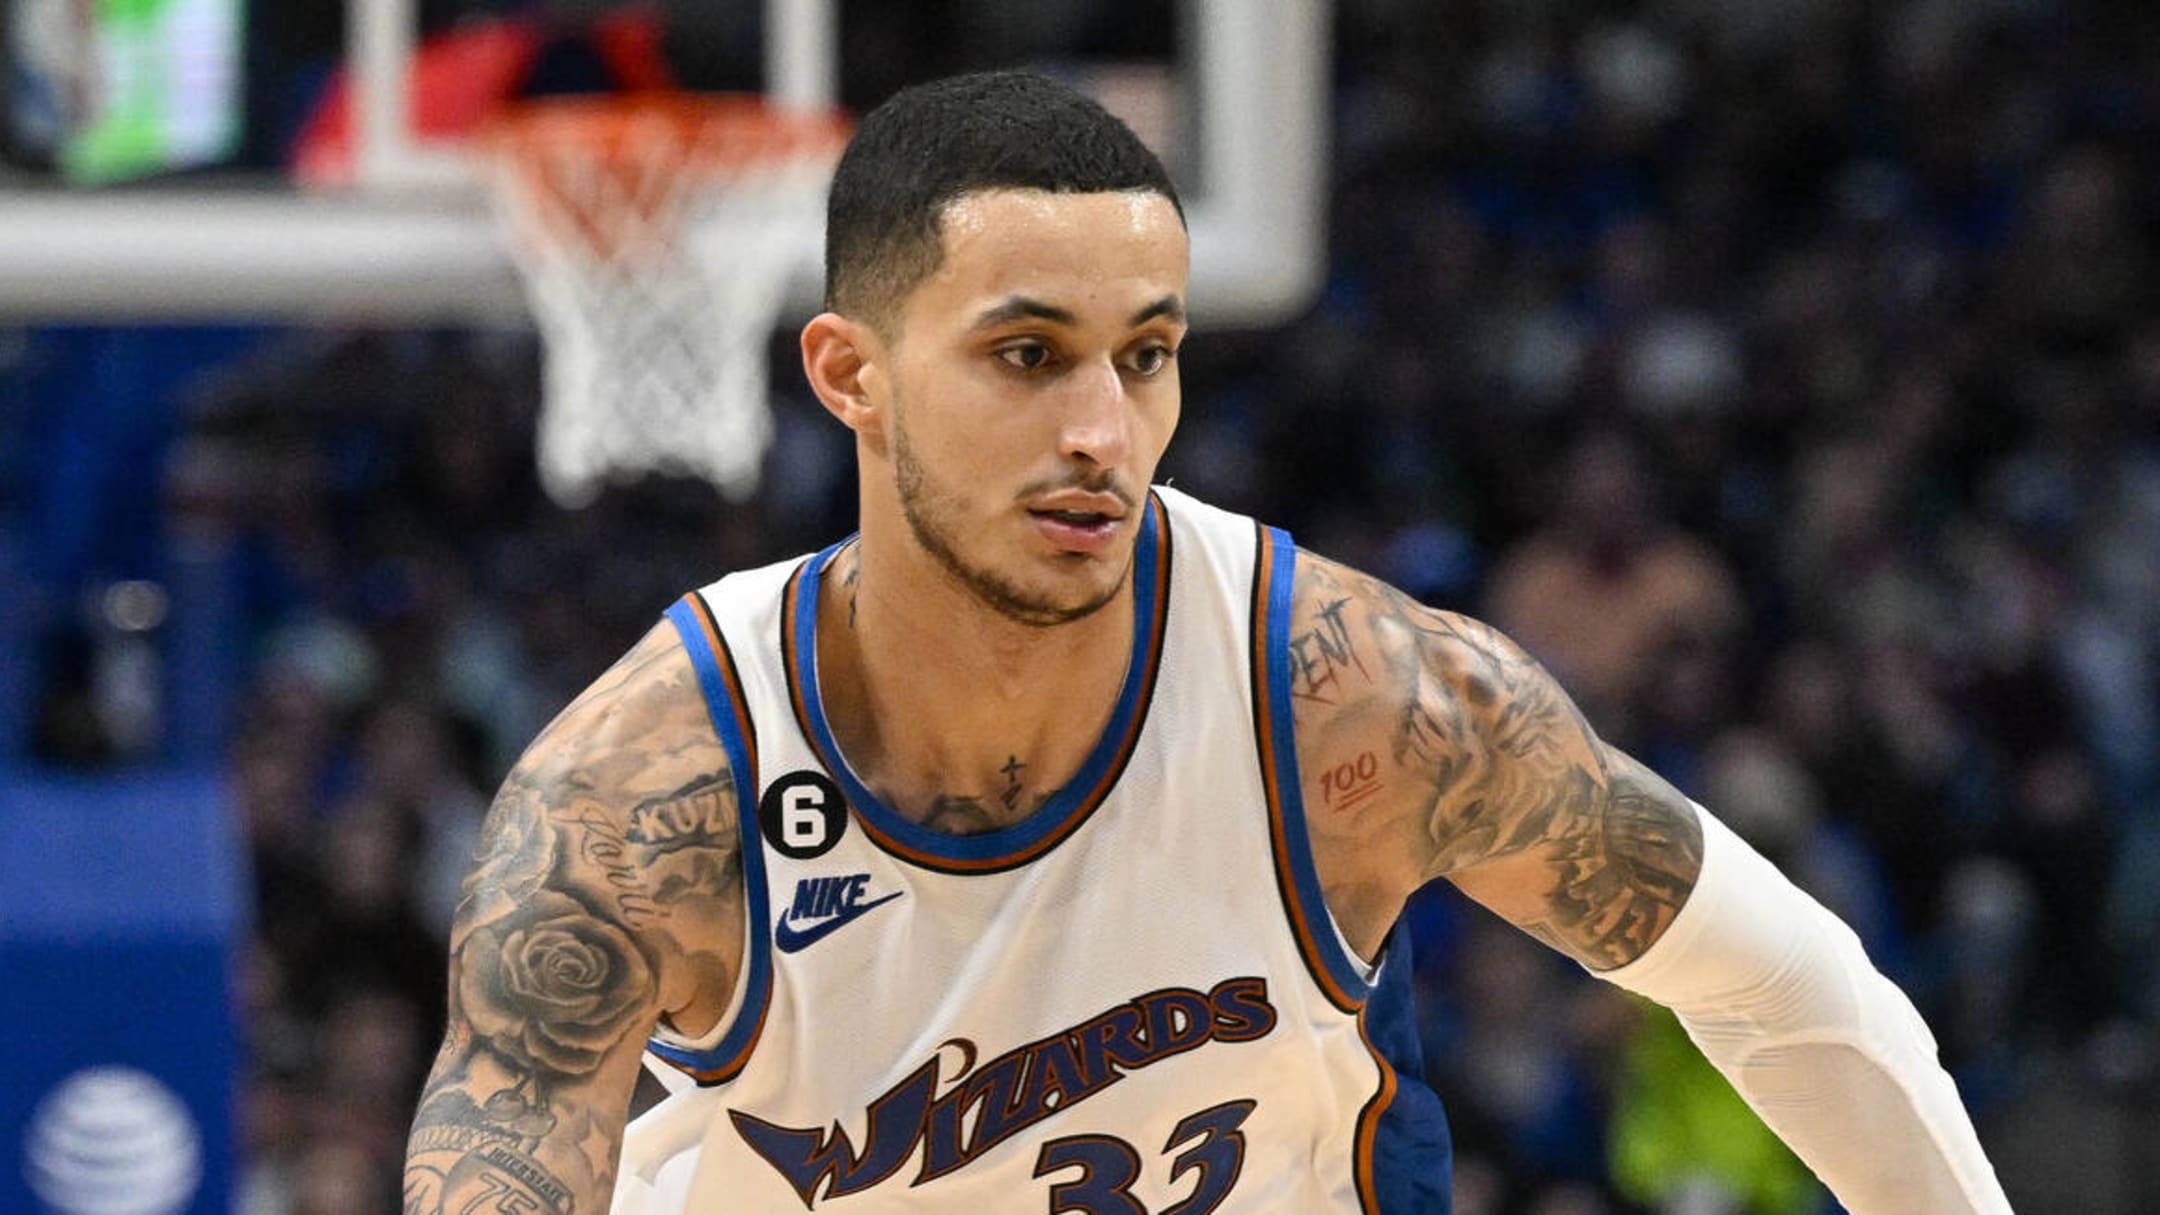 Kyle Kuzma expresses deep frustration with the Wizards defense